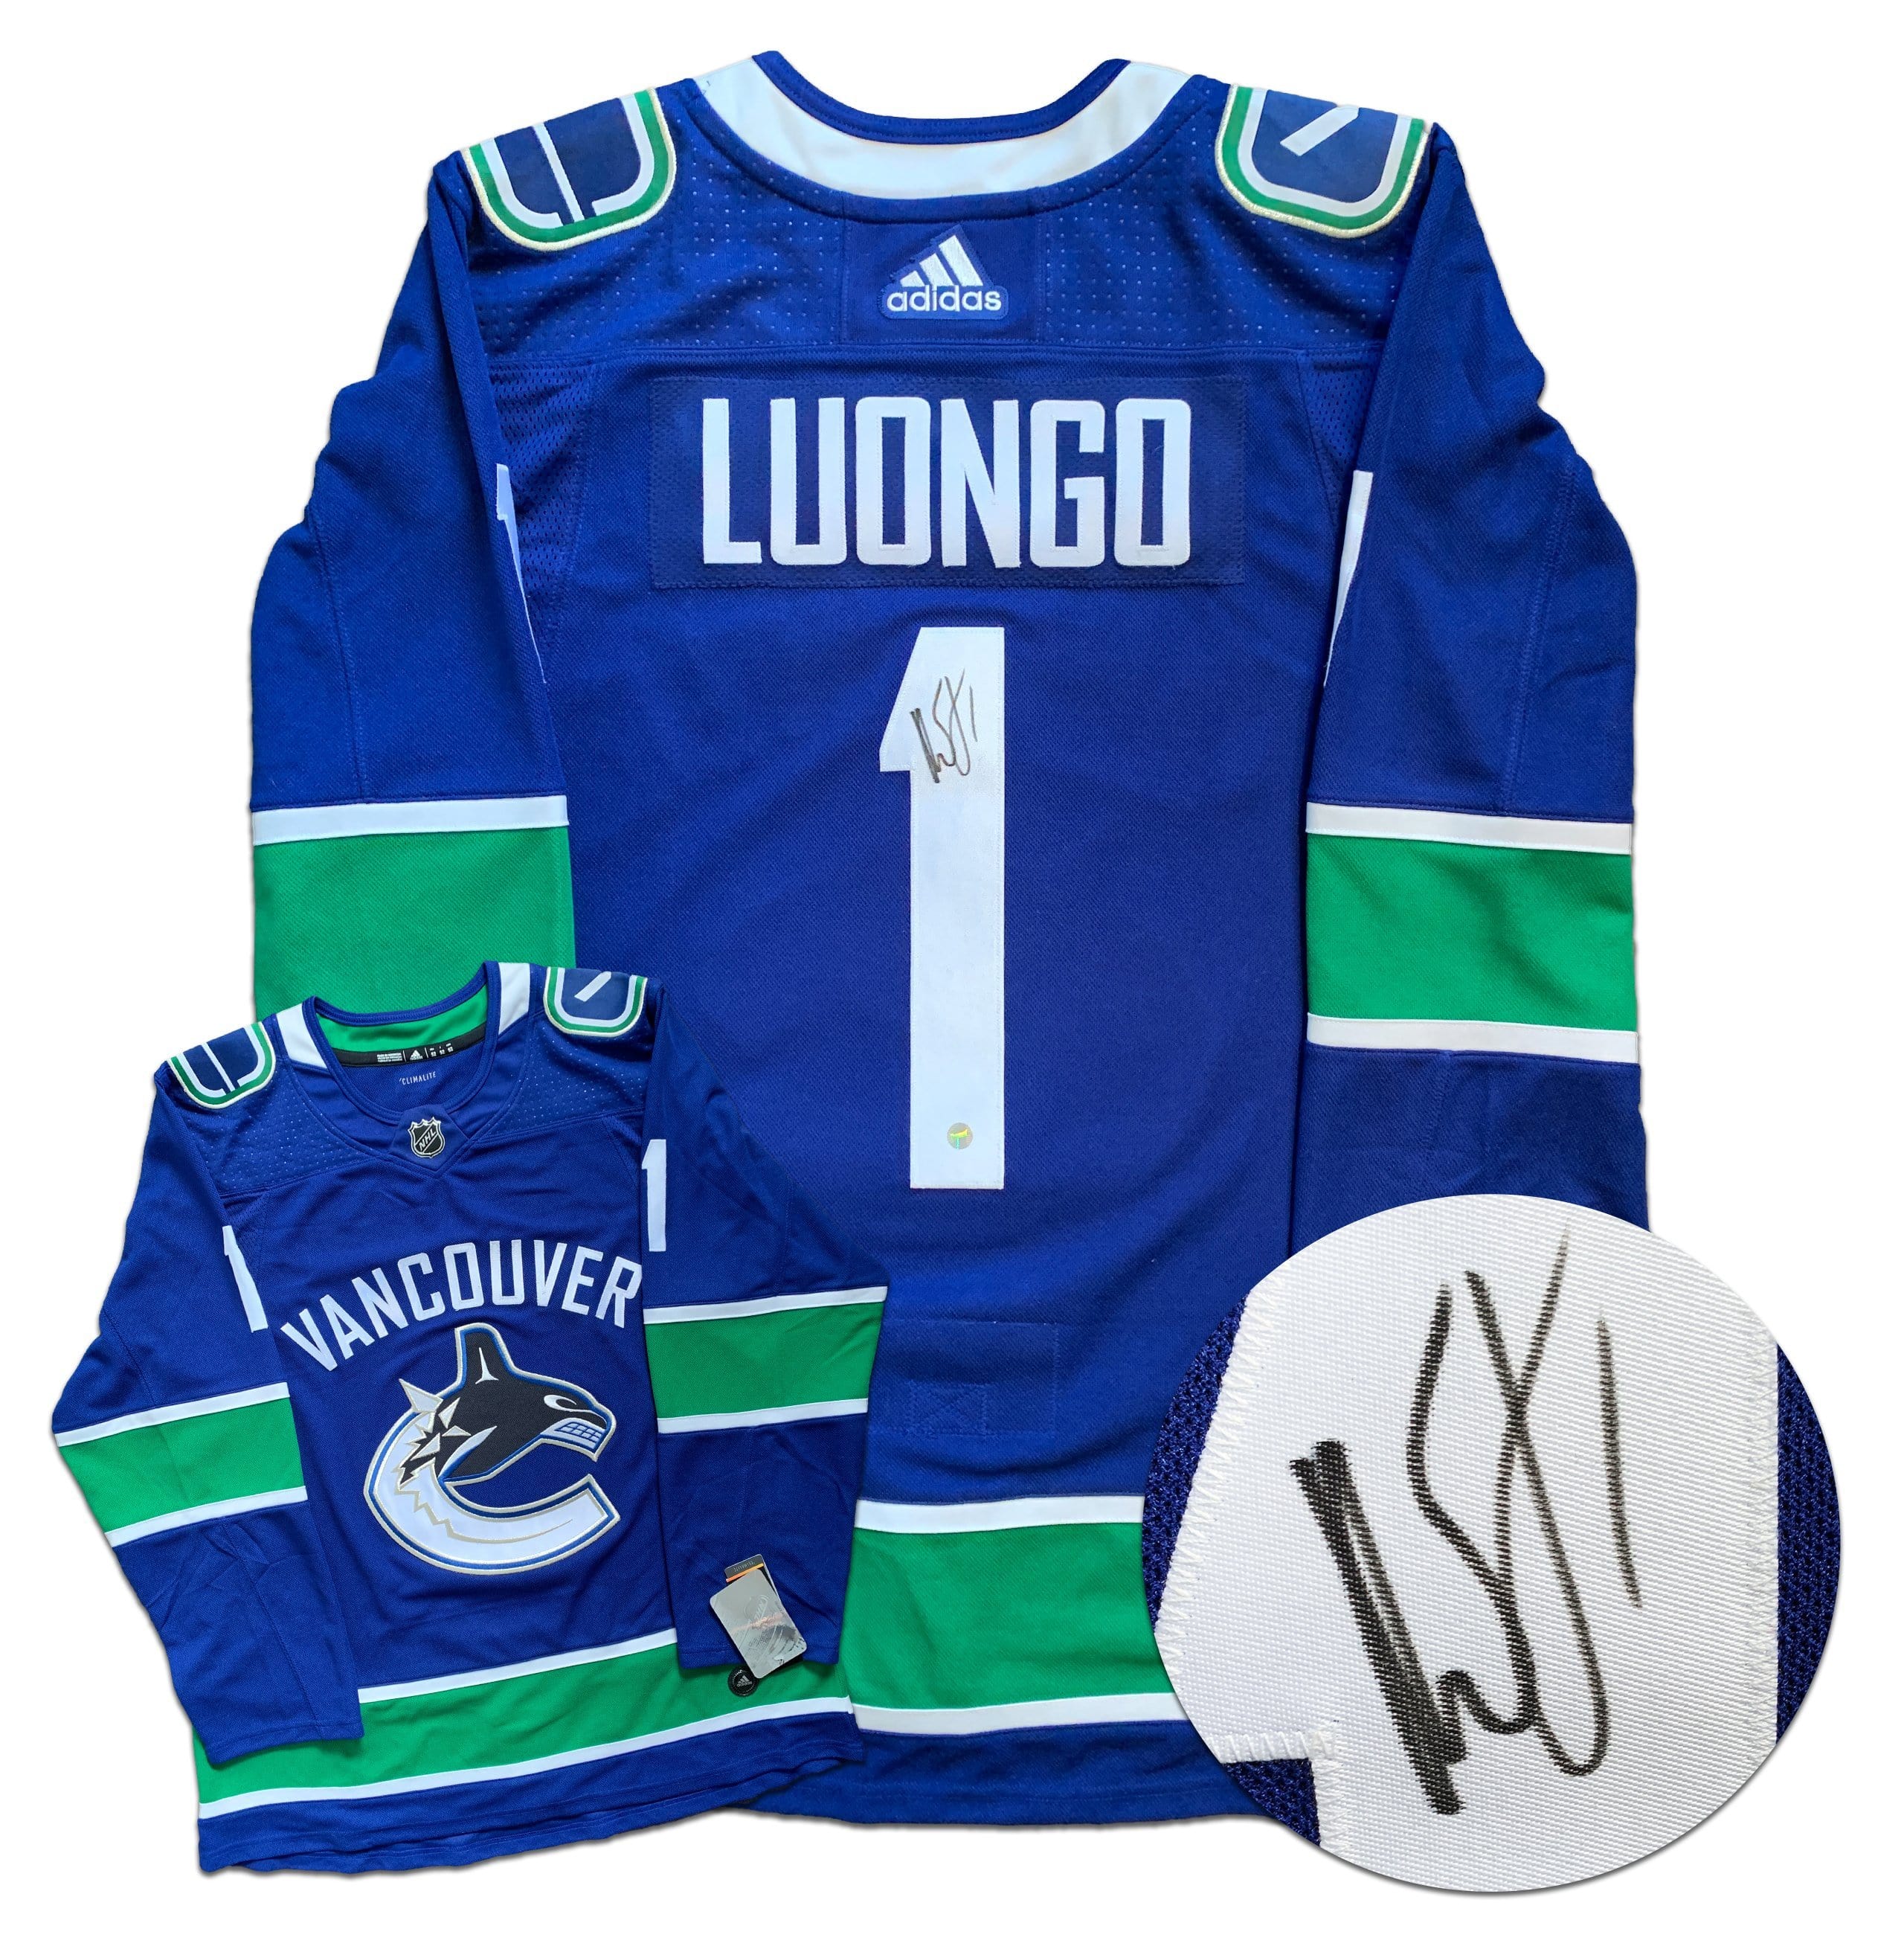 signed luongo jersey